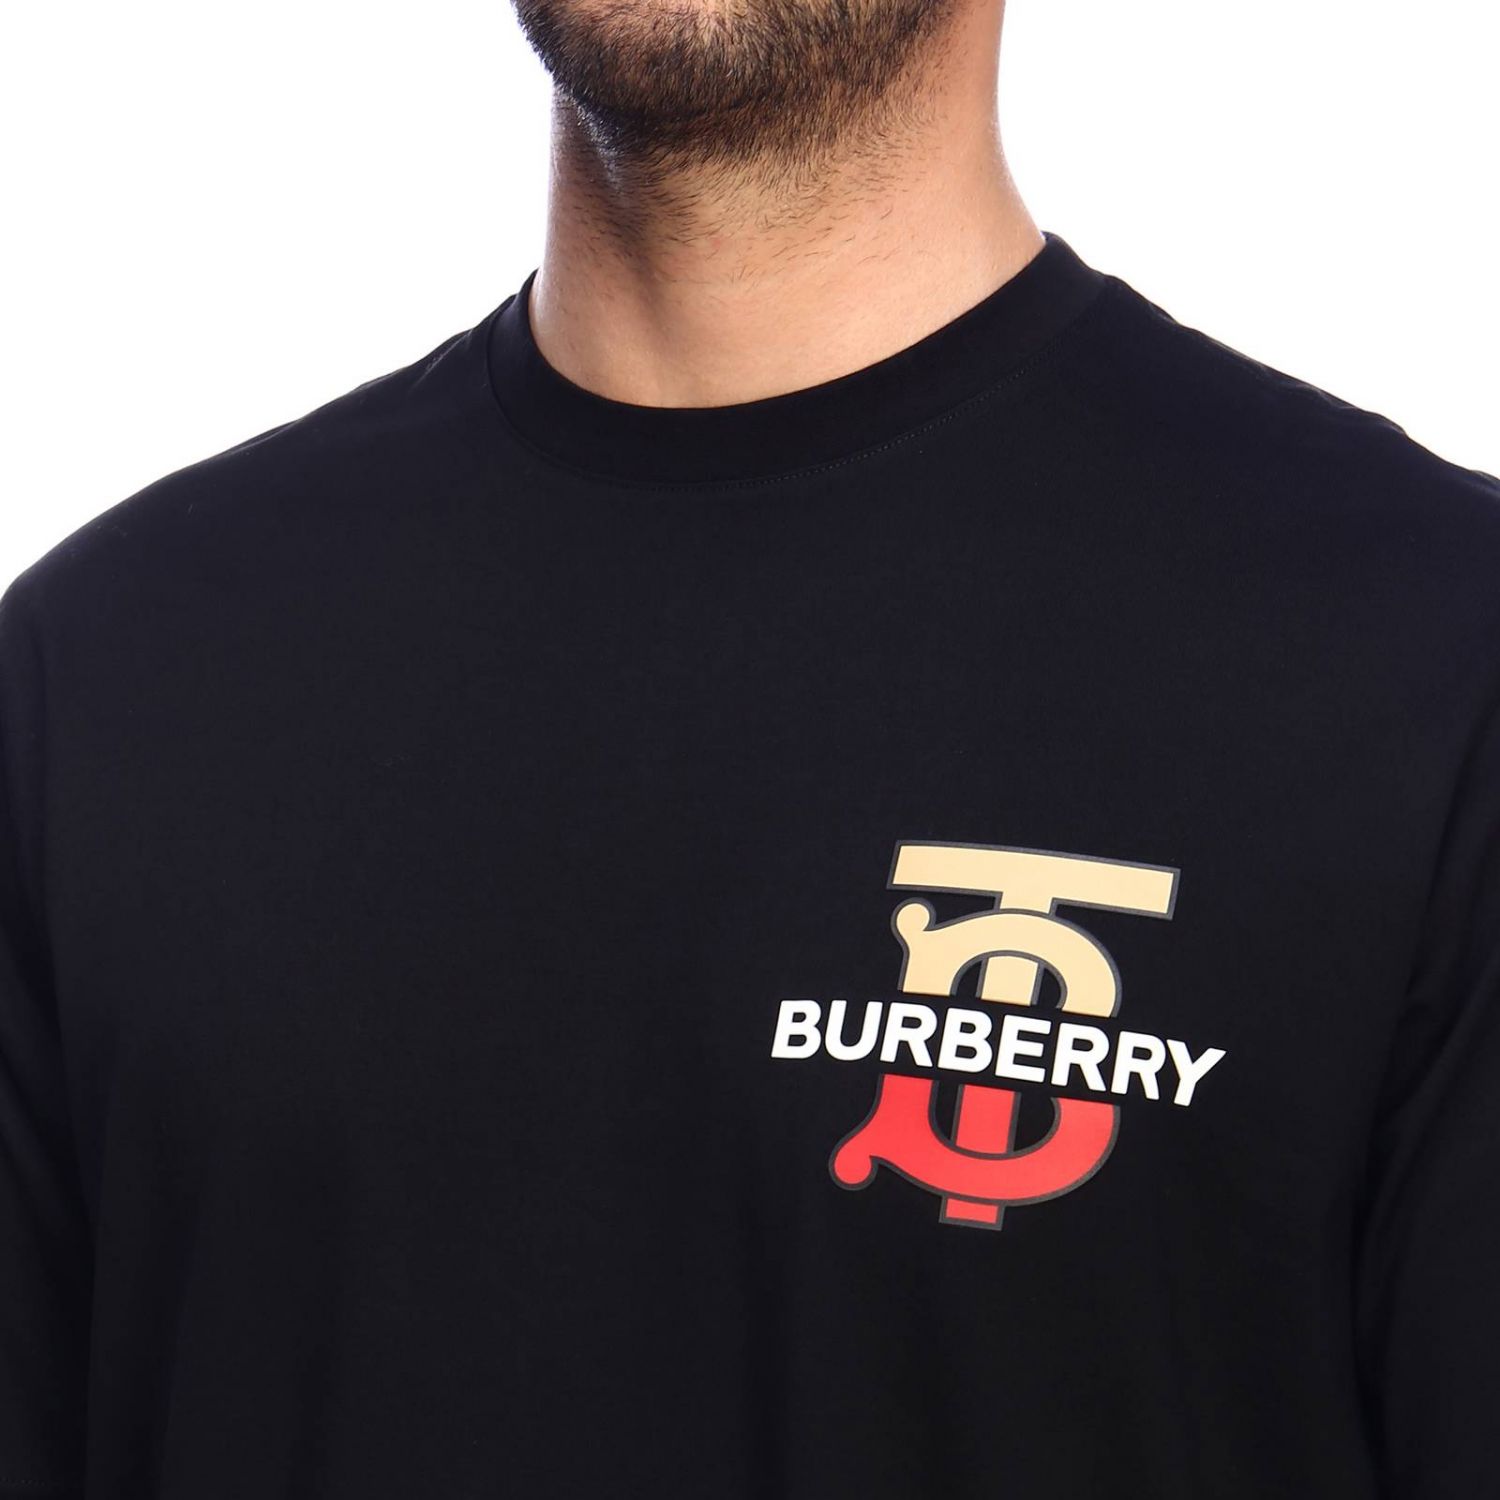 Burberry Outlet: Crew-neck t-shirt with printed tb maxi logo | T-Shirt ...